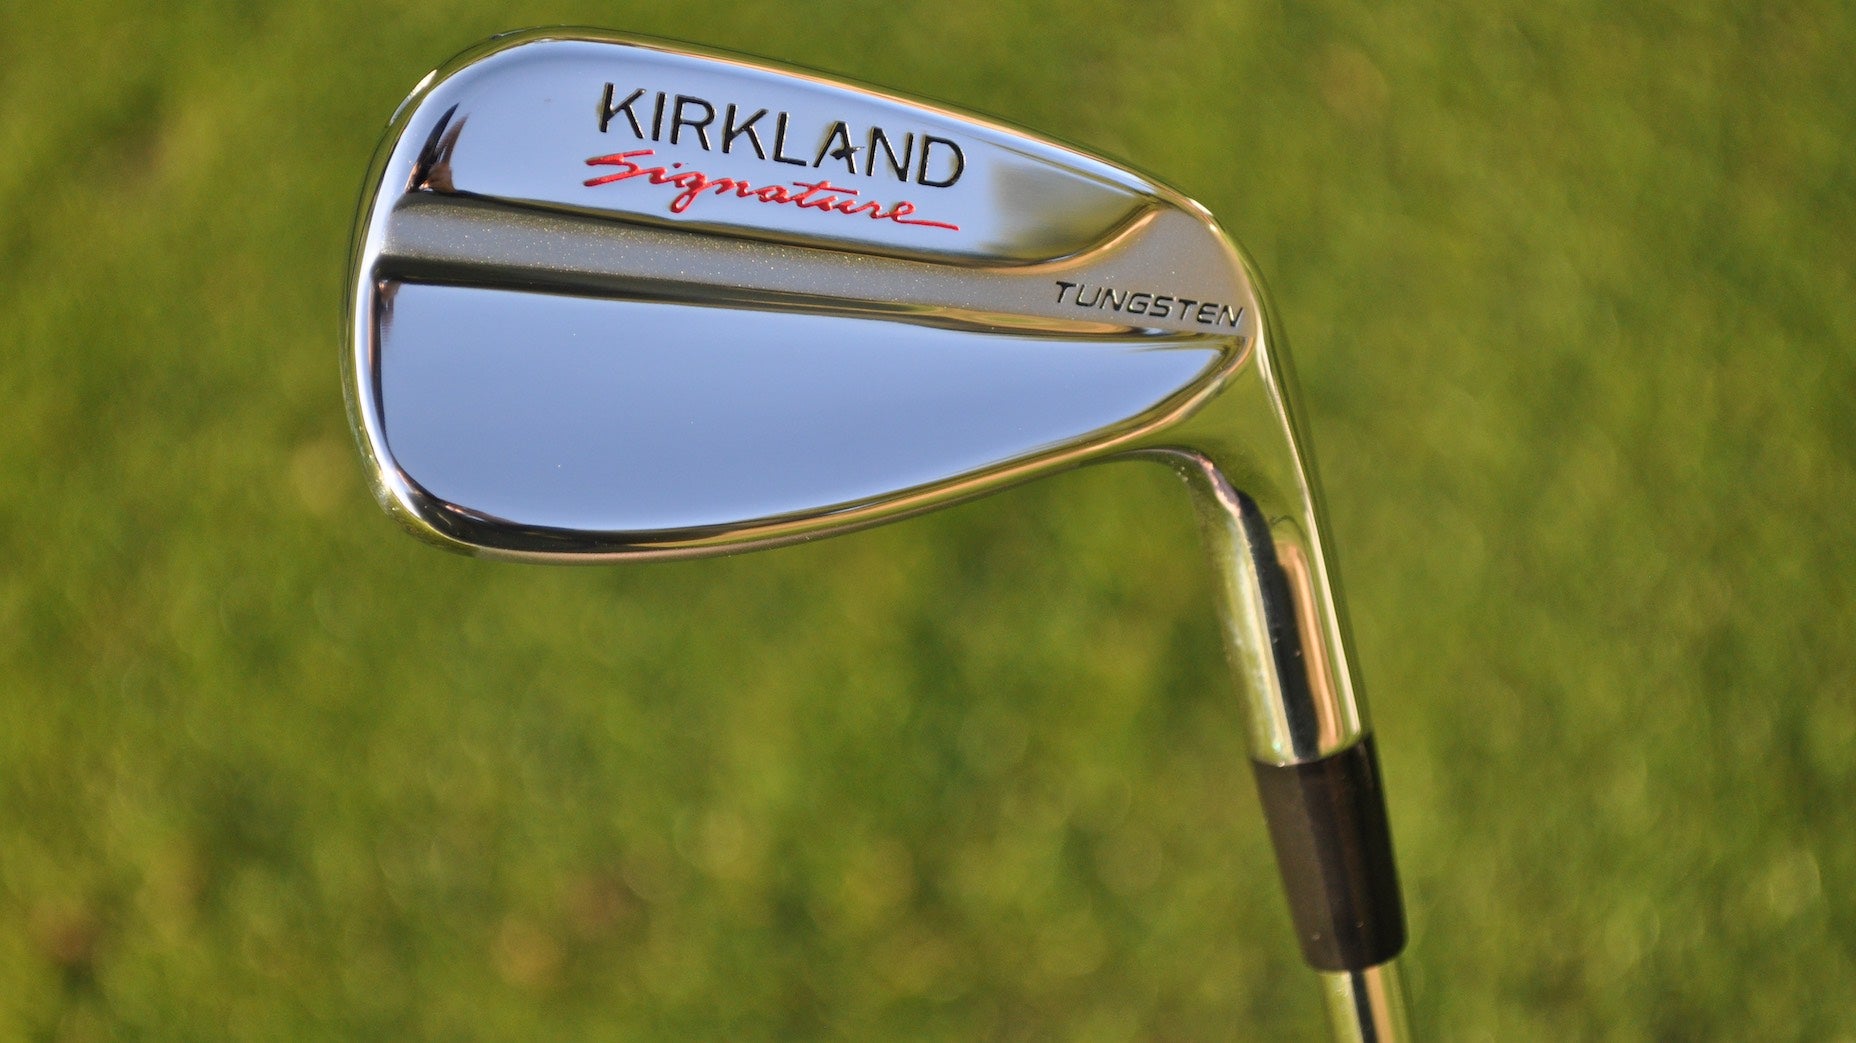 We robottested Costco's Kirkland irons. Here are 3 things we learned